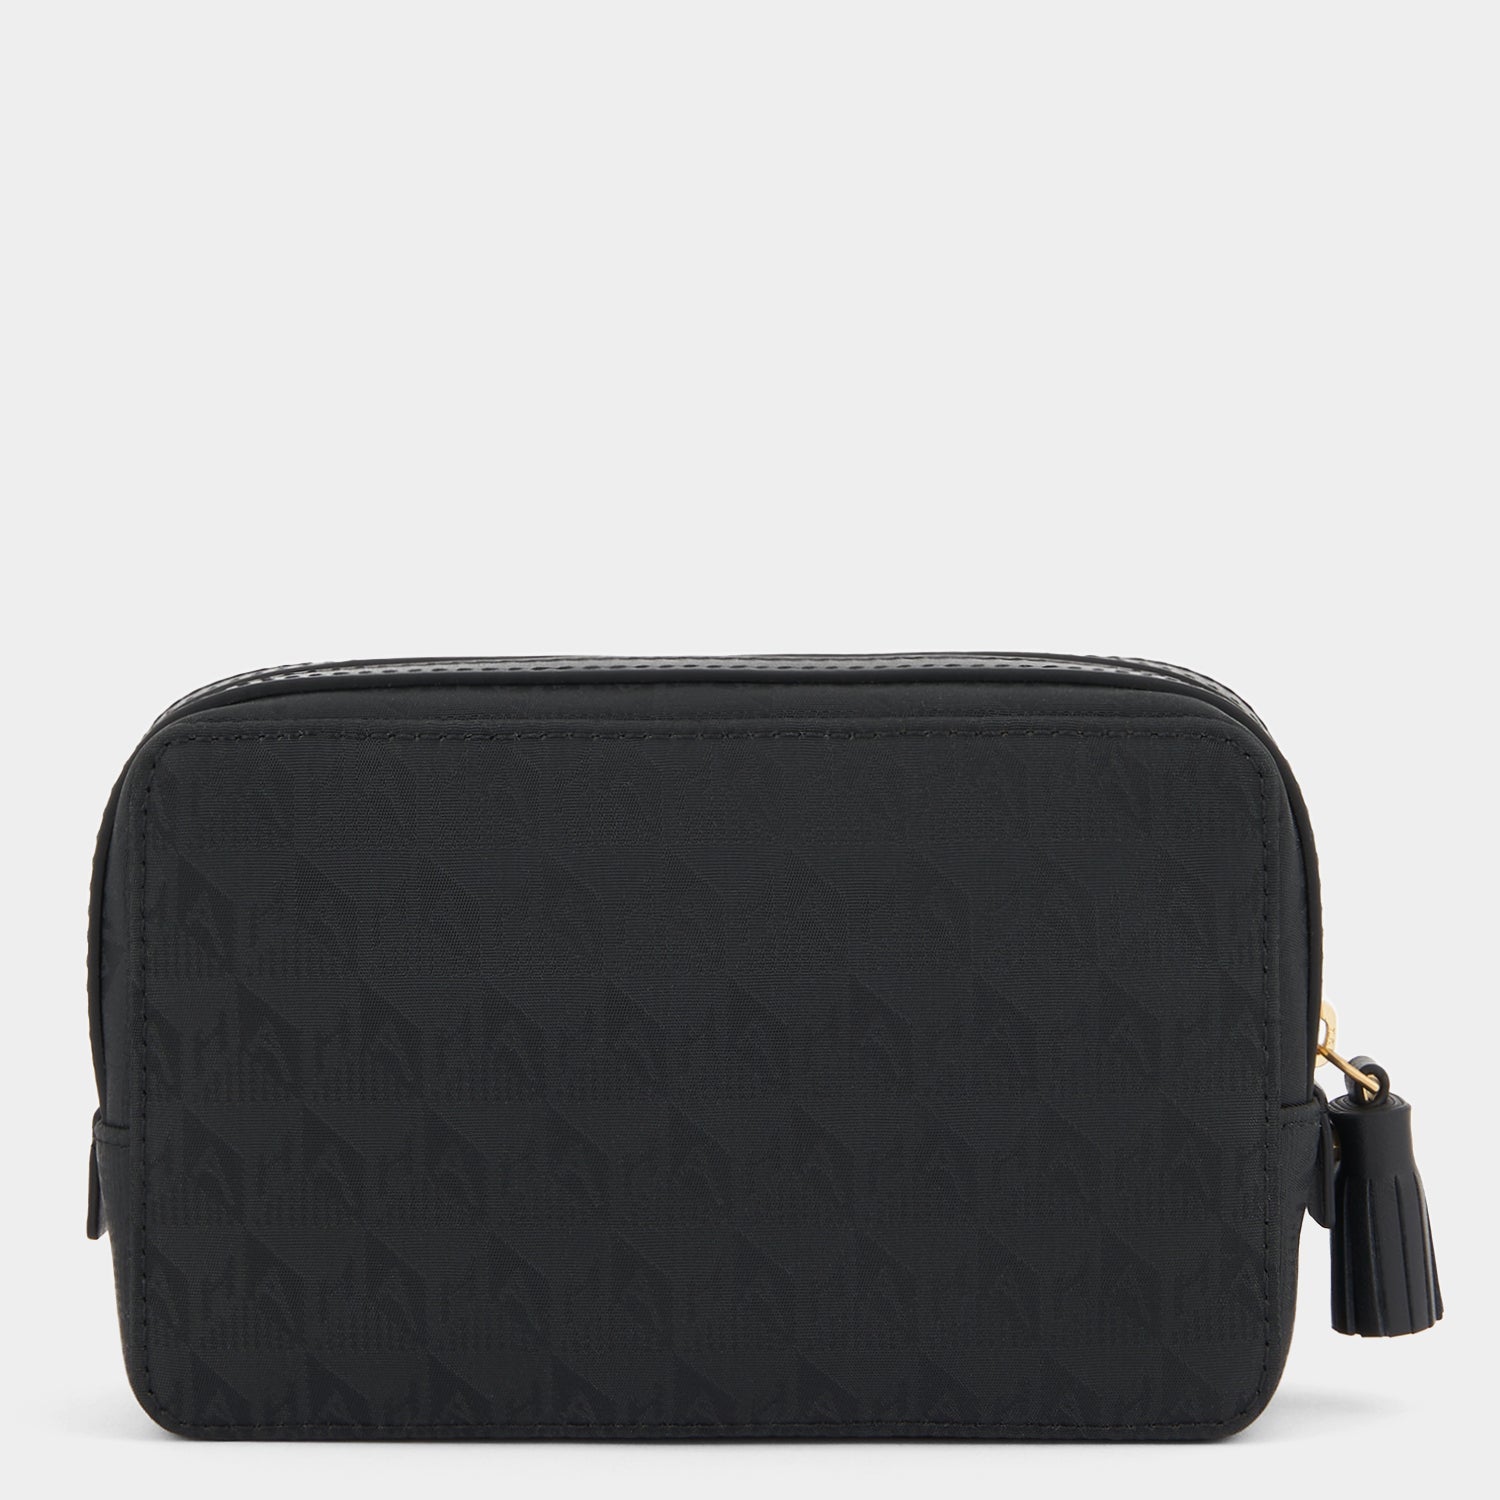 Logo Important Things Pouch -

                  
                    Jacquard Nylon in Black -
                  

                  Anya Hindmarch US
